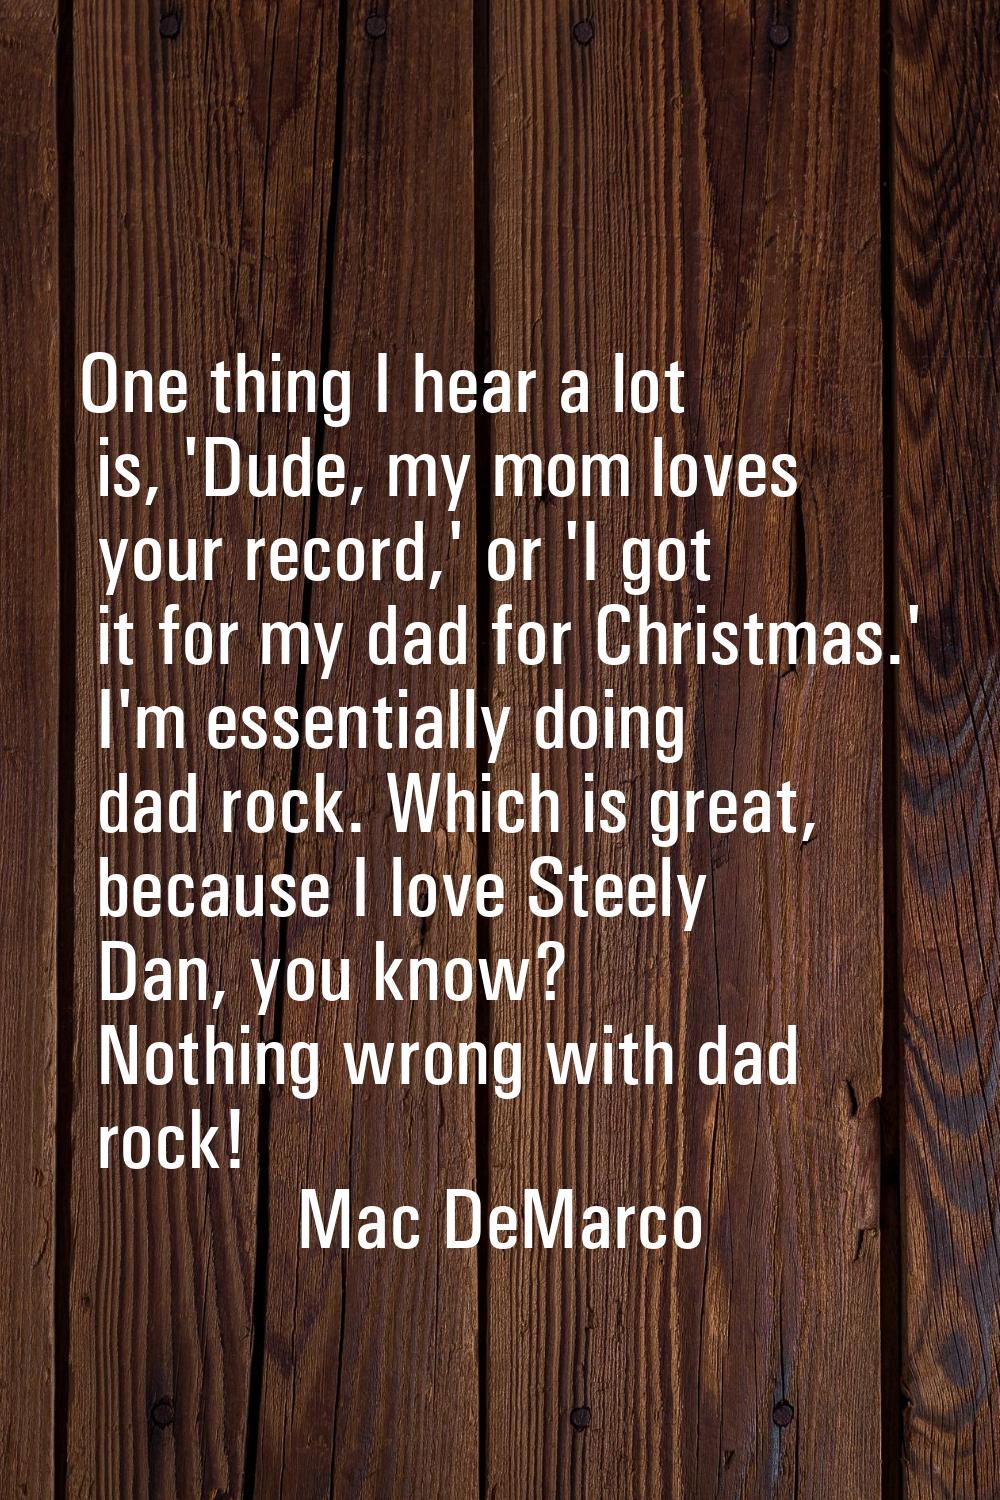 One thing I hear a lot is, 'Dude, my mom loves your record,' or 'I got it for my dad for Christmas.